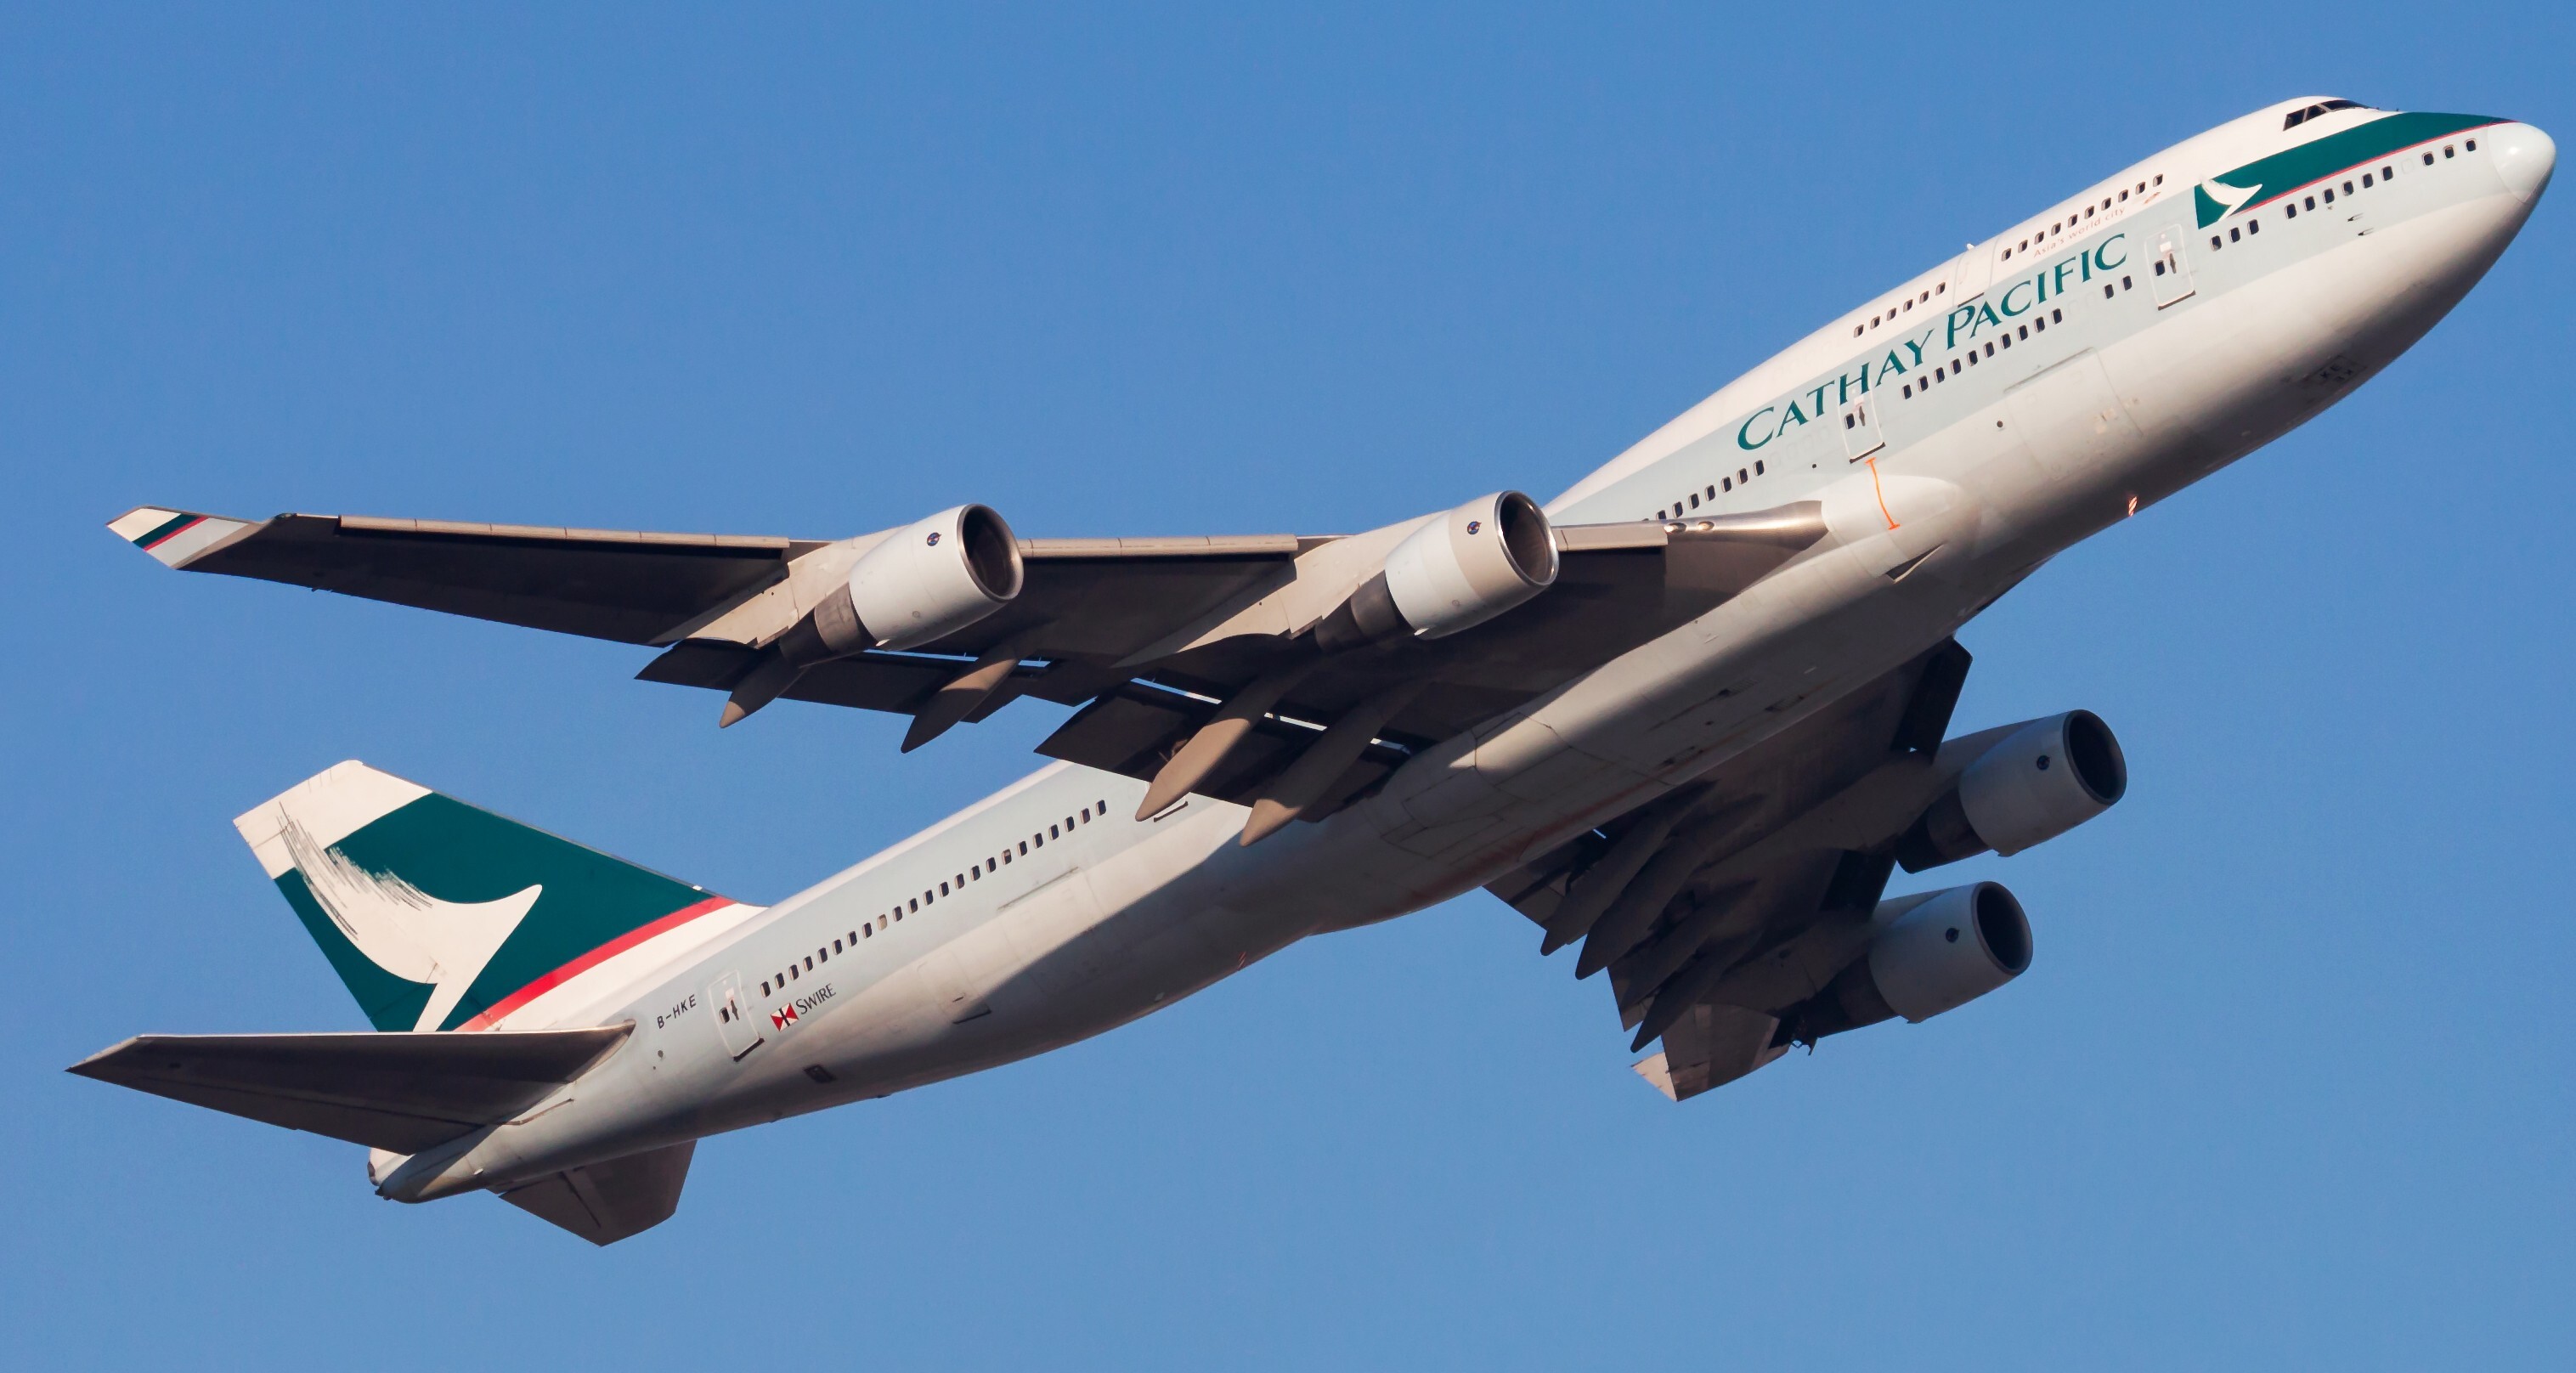 Cathay Pacific’s bond sale will help keep planes in the air during the coronavirus pandemic. Photo: Shutterstock